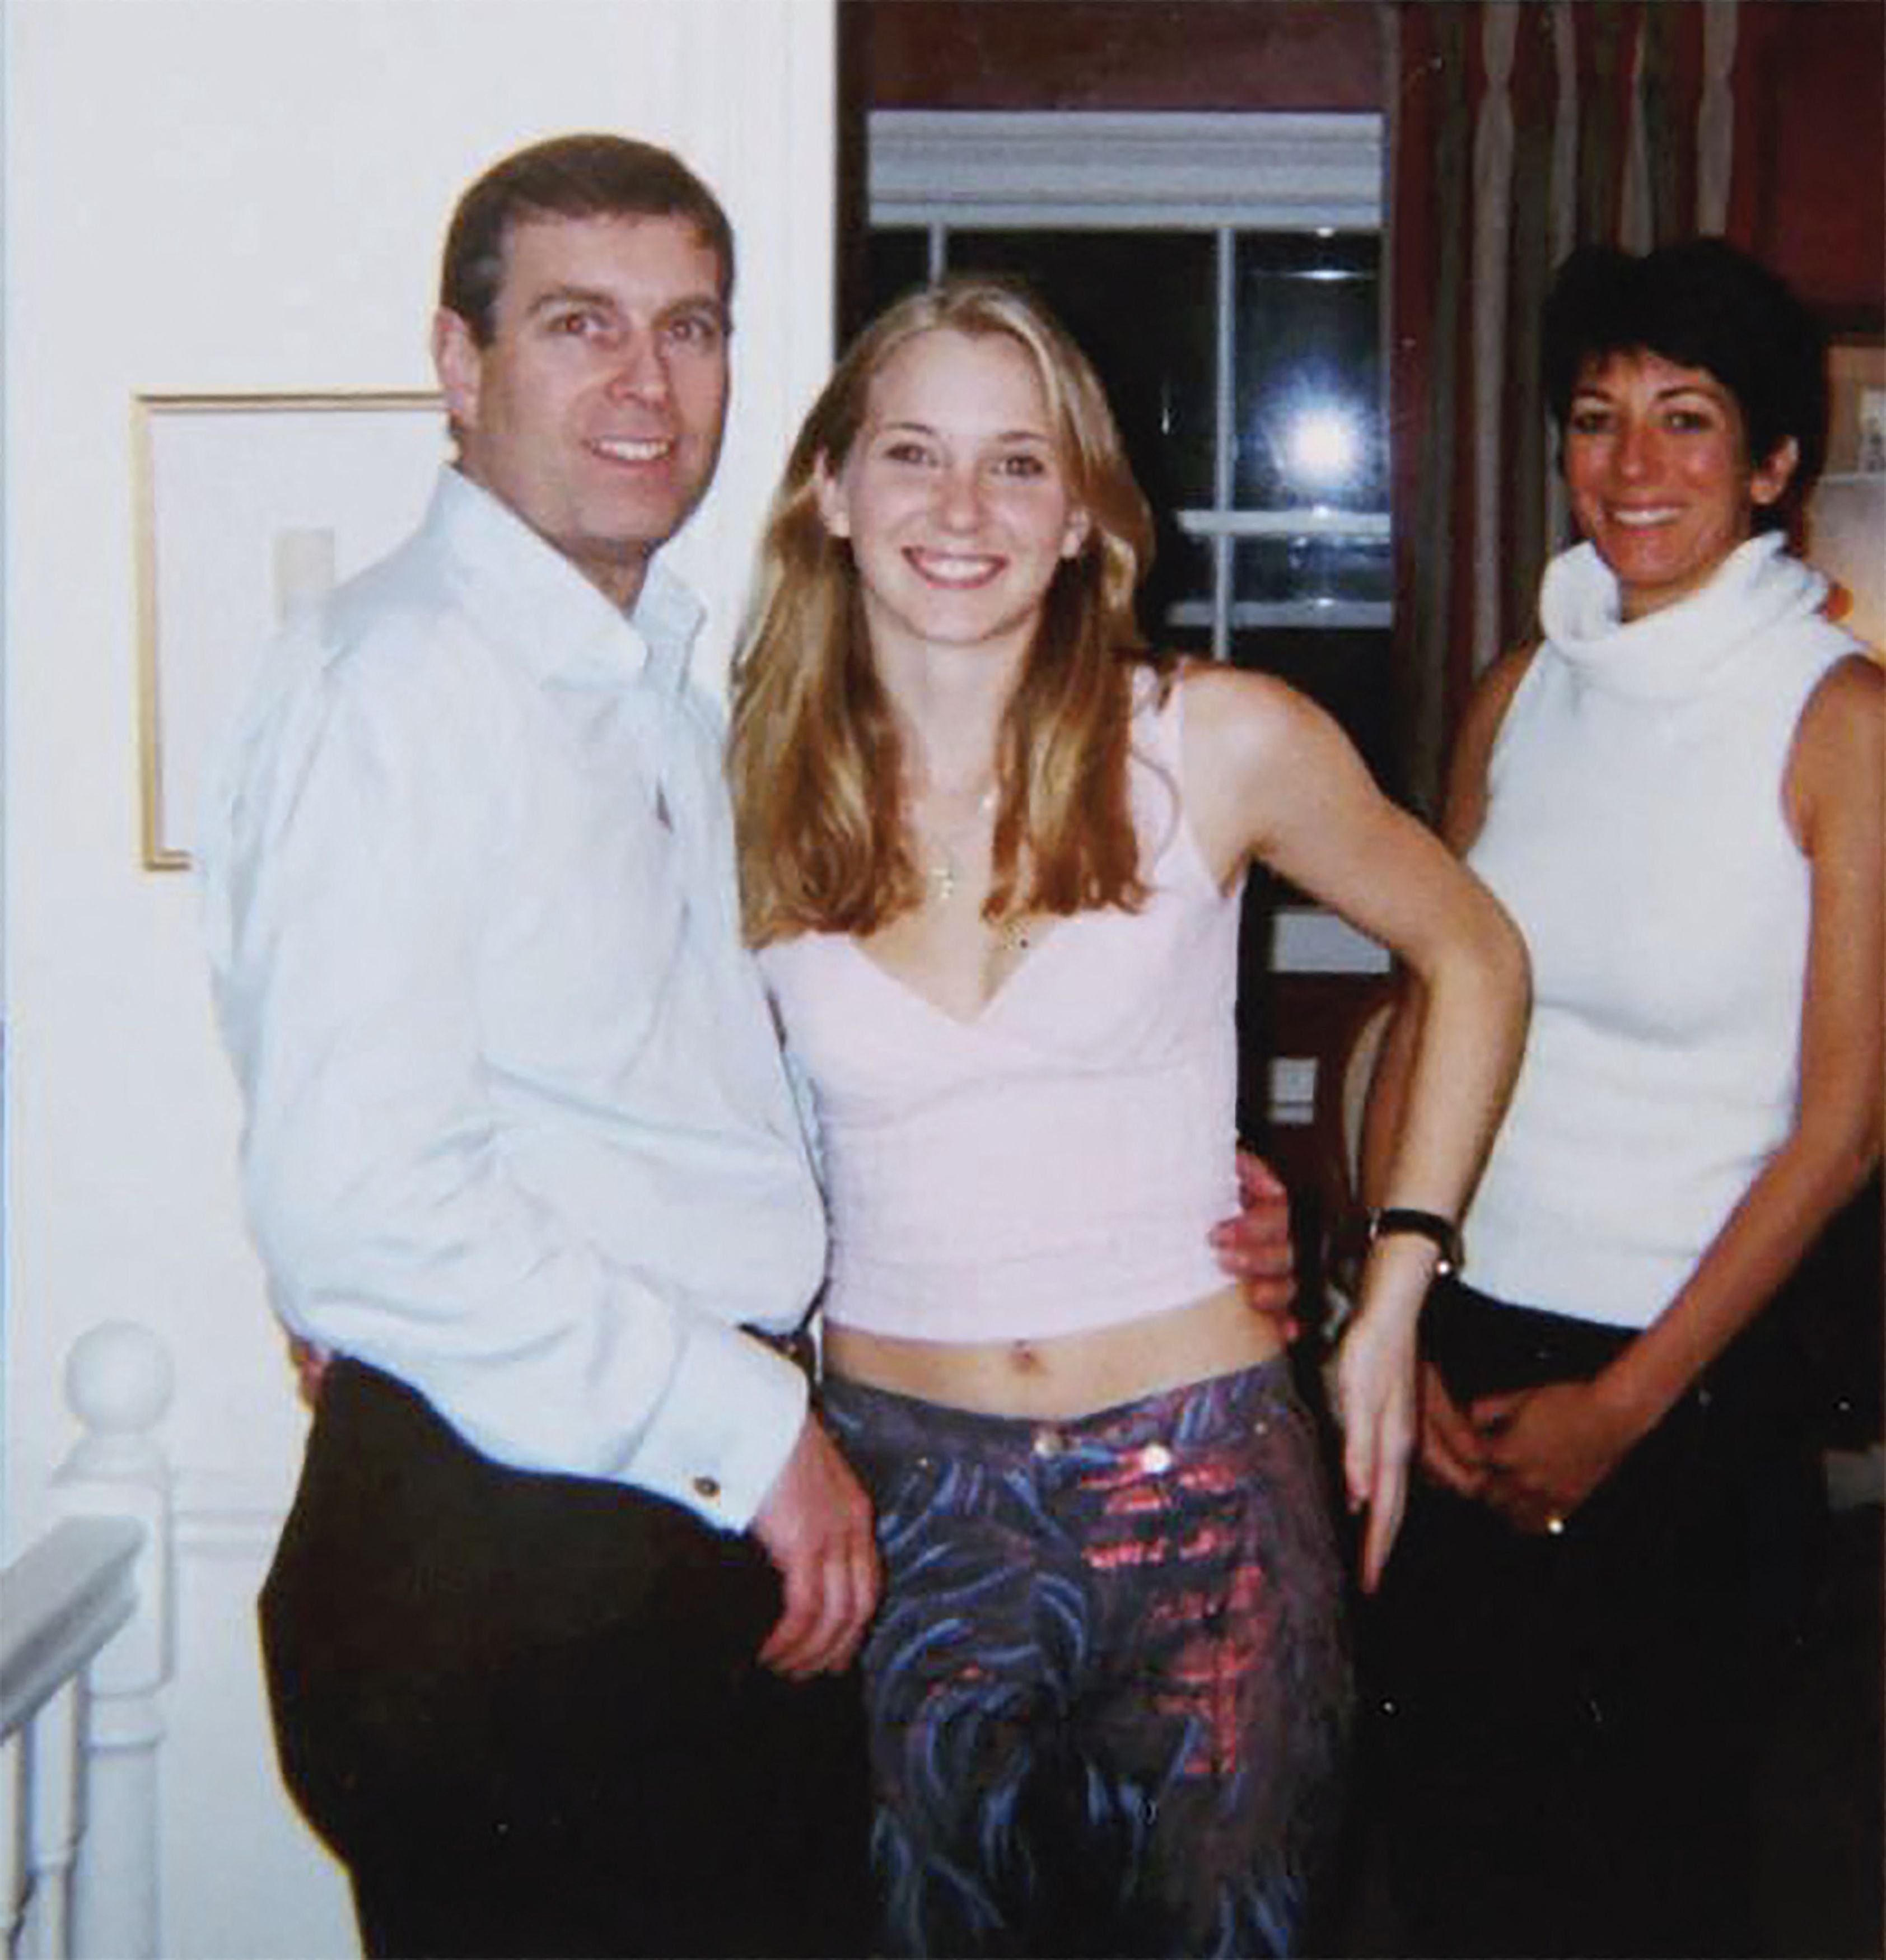 Virginia Guiffre was paid $100,000 for her story and this picture with Prince Andrew by a media outlet, Ghislaine Maxwell’s legal team claimed